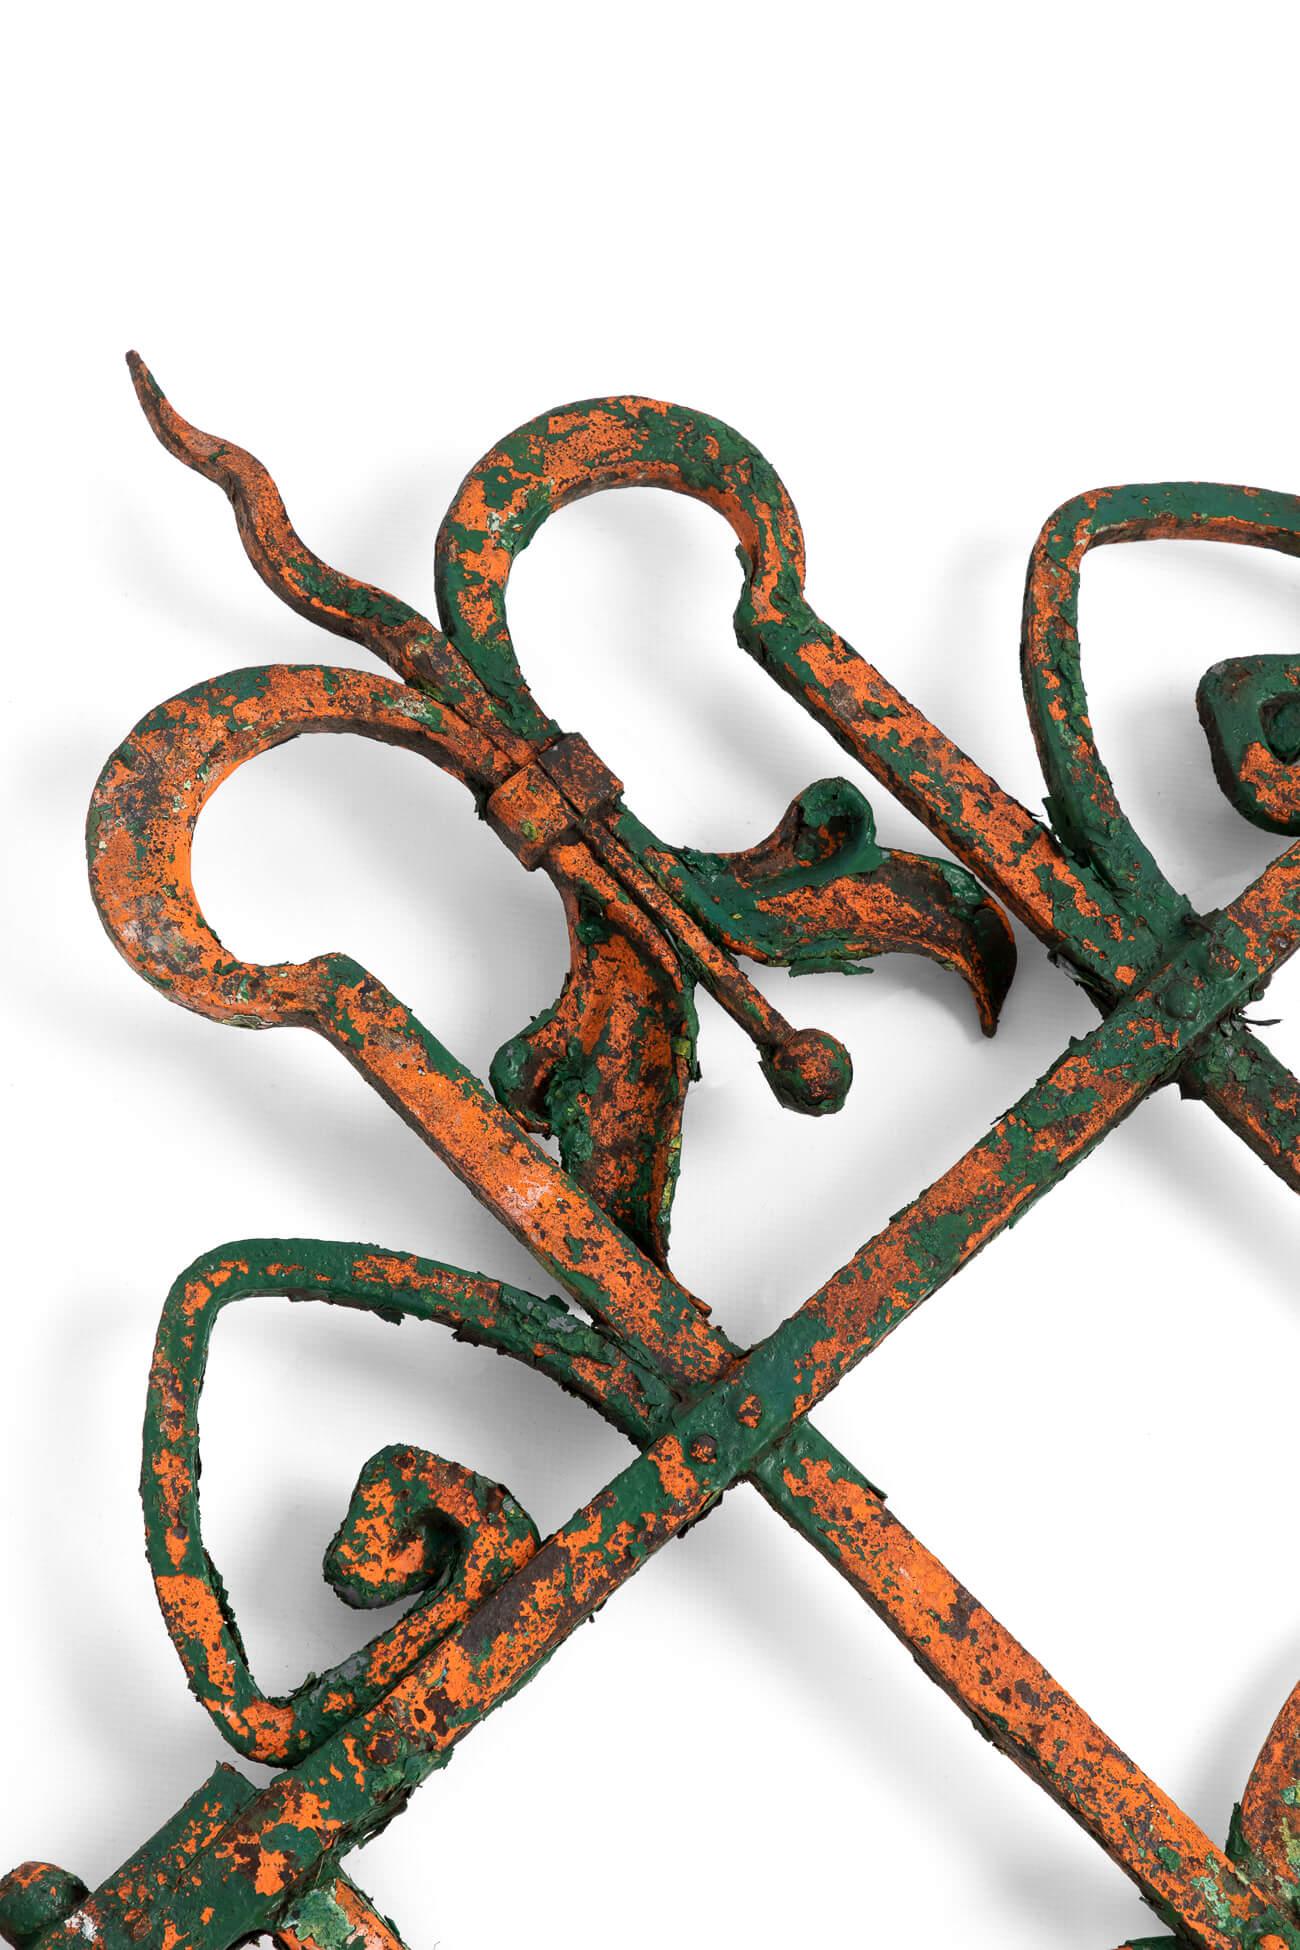 Hand-Painted Pair of Antique Wrought Iron Gates in Original Flaky Paint, circa 1900